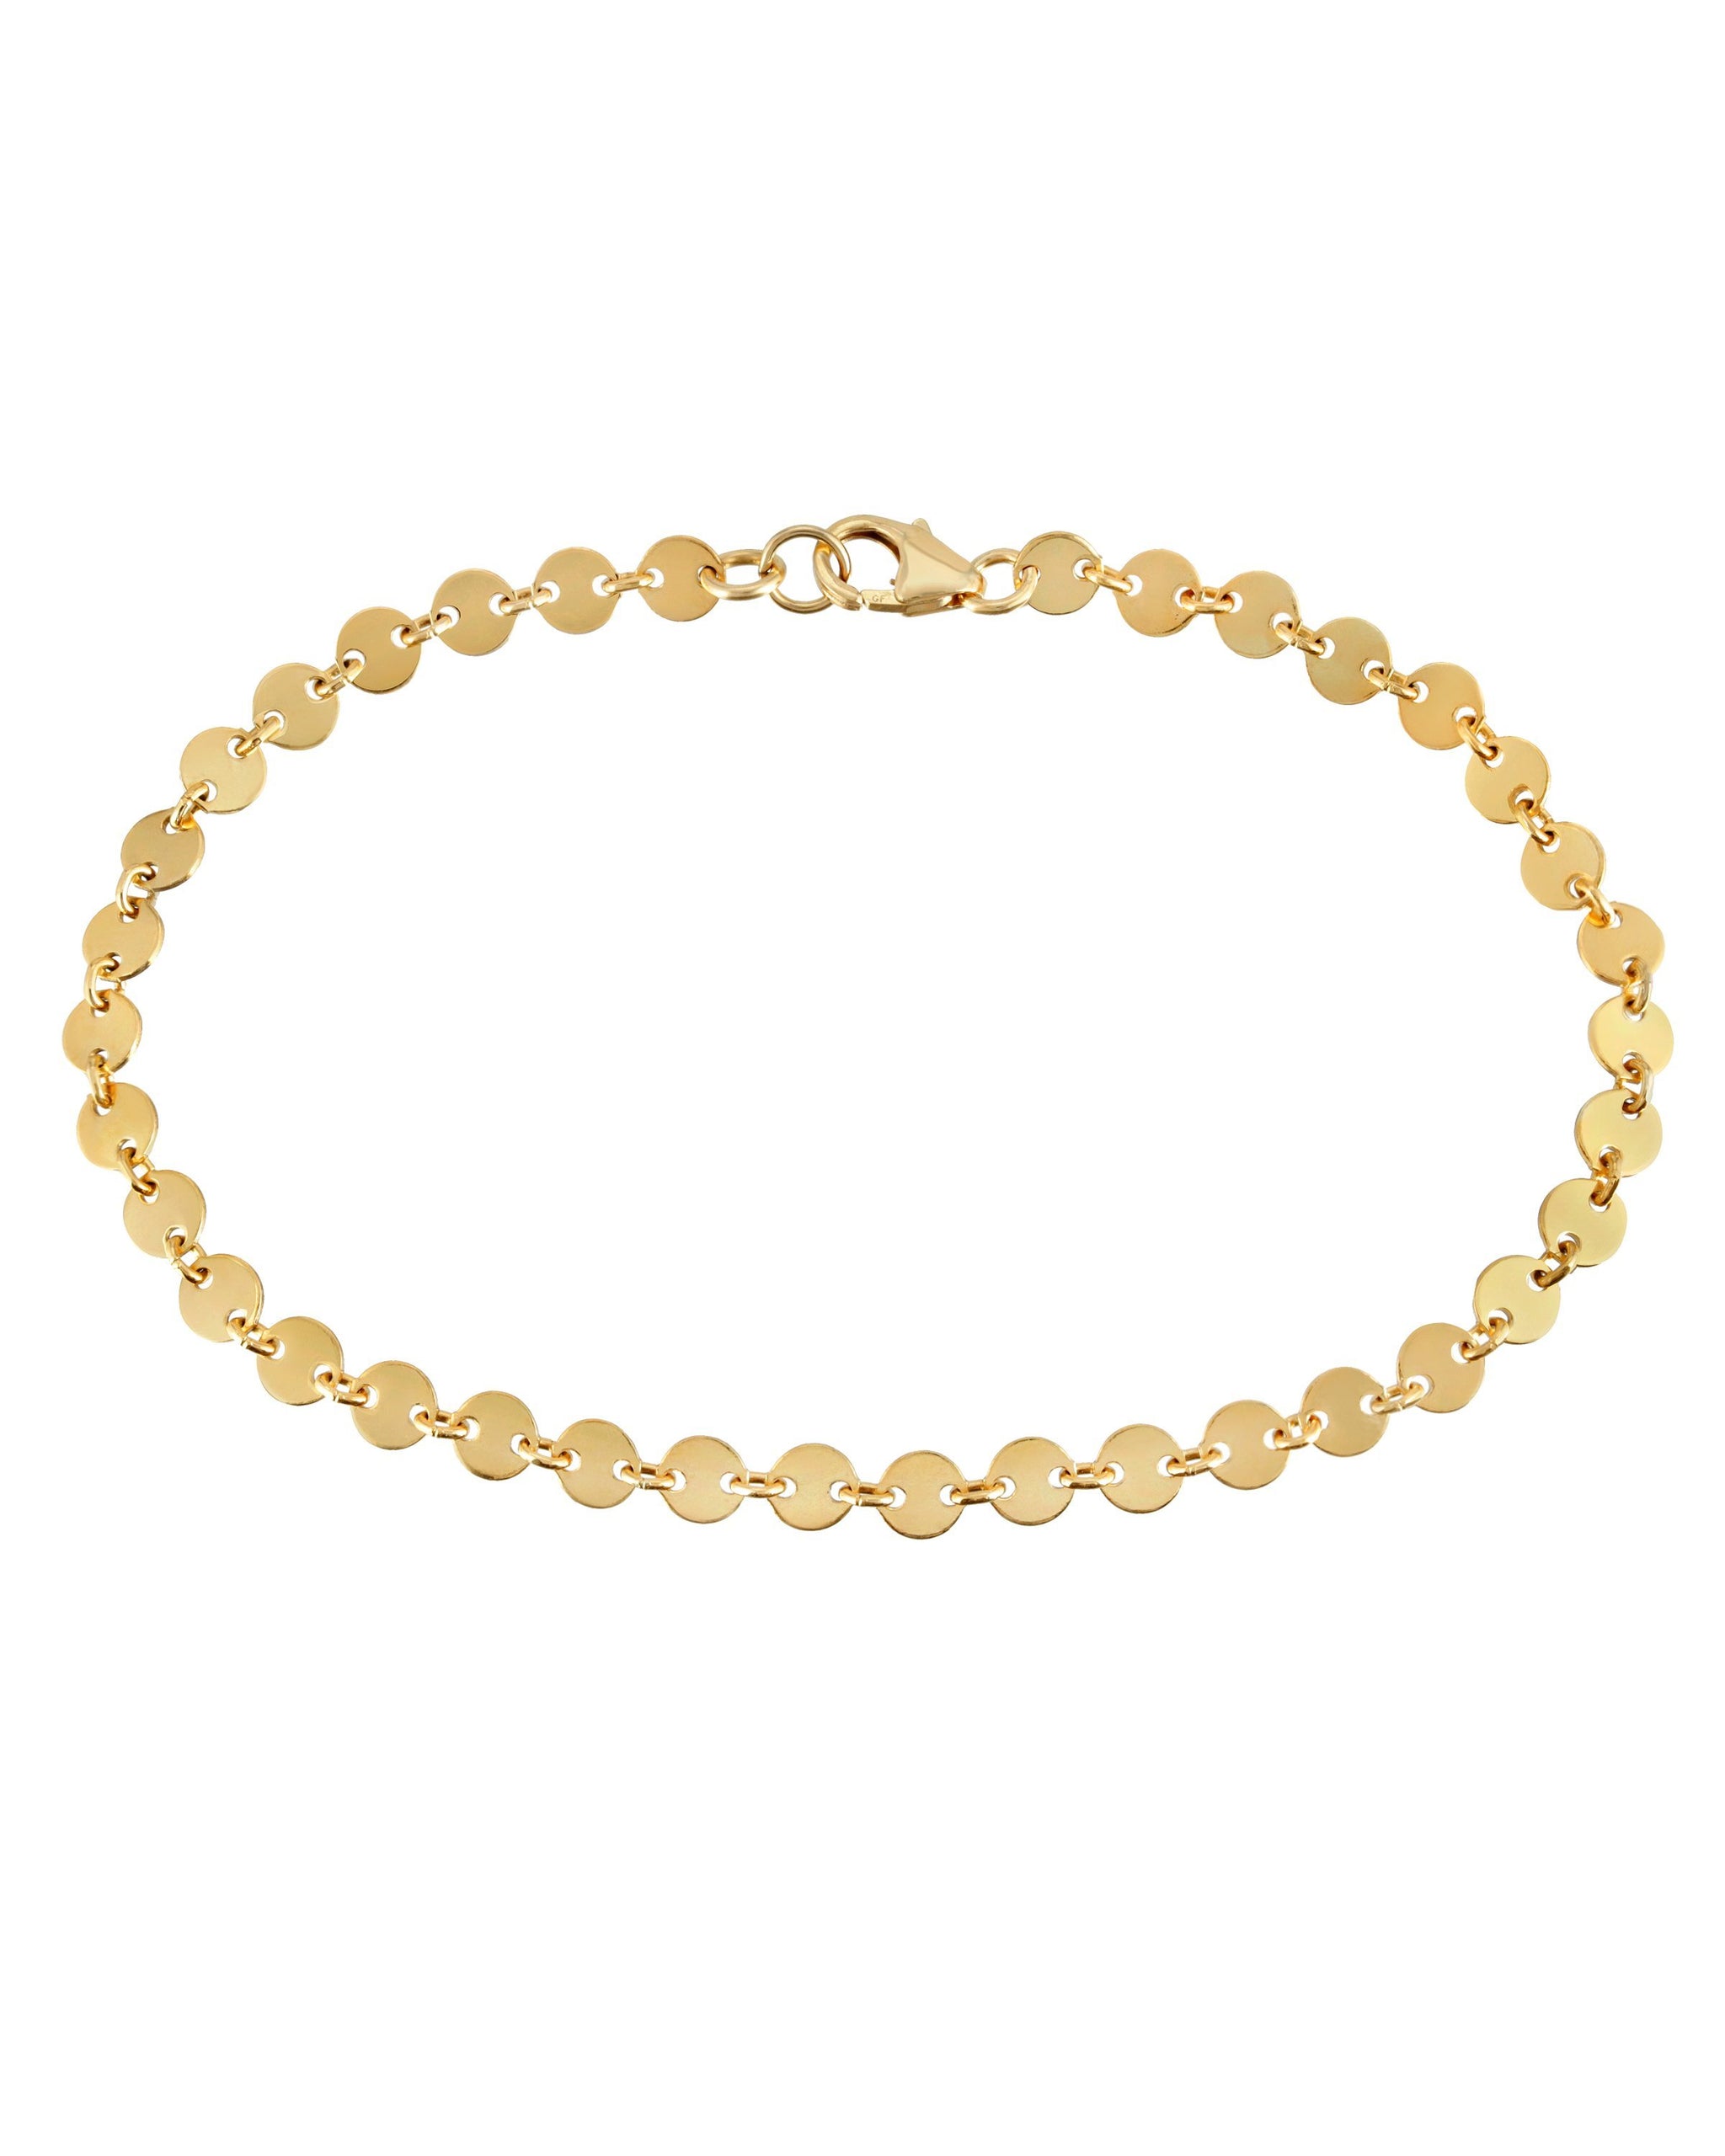 14k Yellow Gold Bracelet Beads/natural Stones Bracelet/pure Gold  Jewellry/gold Bracelets for Men's and Women's/bracelet With Gold Beads. 